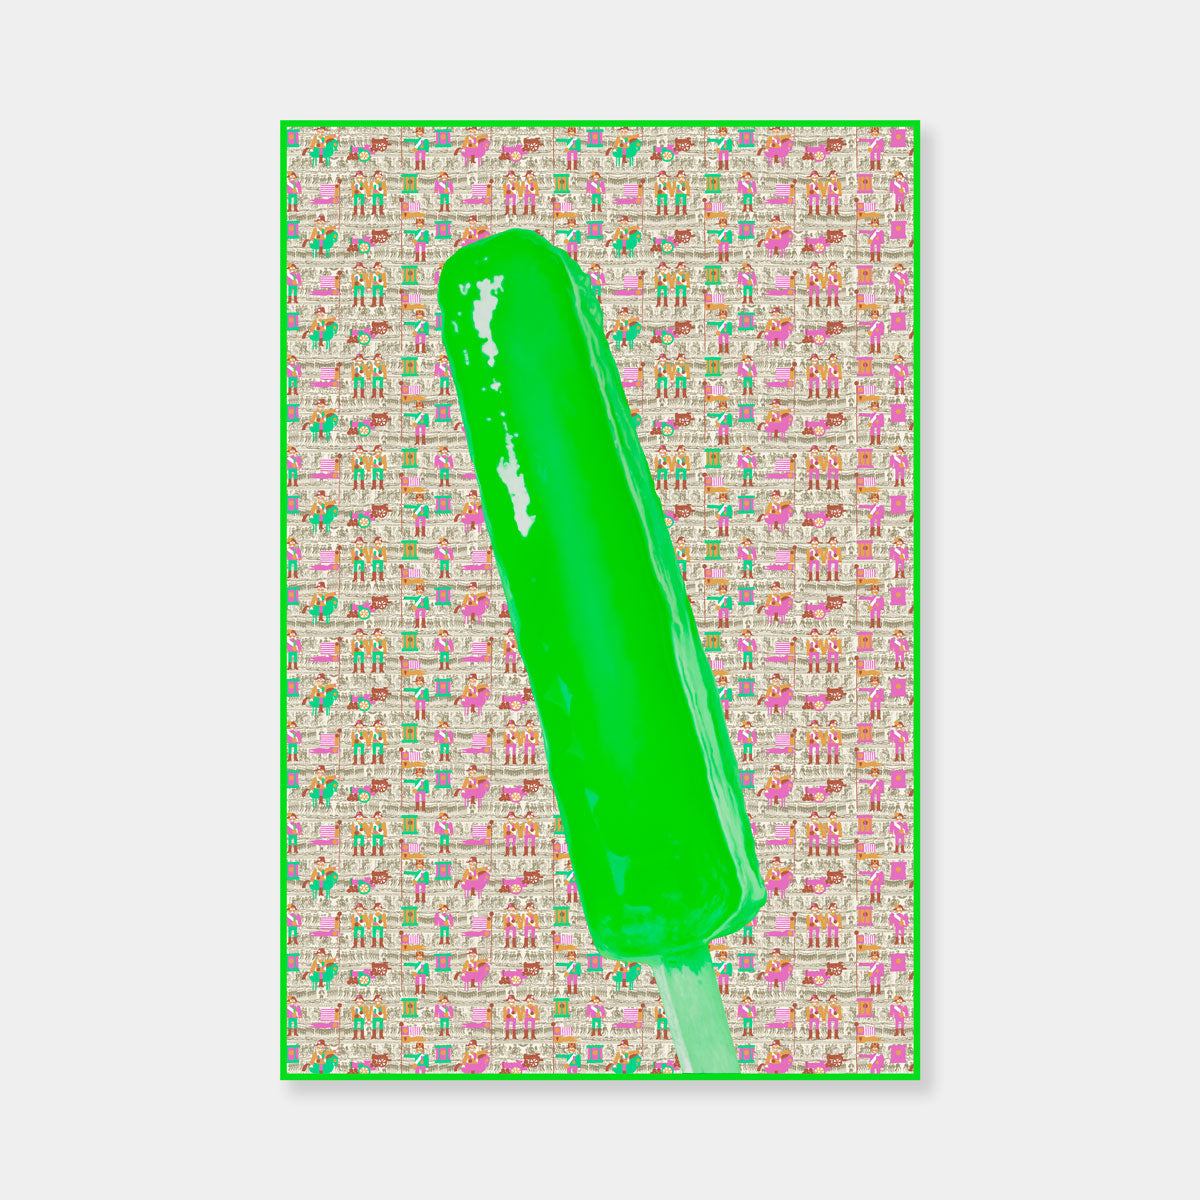 Artsuite - Jack Early Popsicle Limited Edition Multiple - Green - Limited Edition Print - 36 x 24 inches.  Early's lexicon is drawn from wondrous childhood memories, where ordinary things and events can leave long-lasting impressions and he composes experiences to communicate sweet remembrances of simpler times.